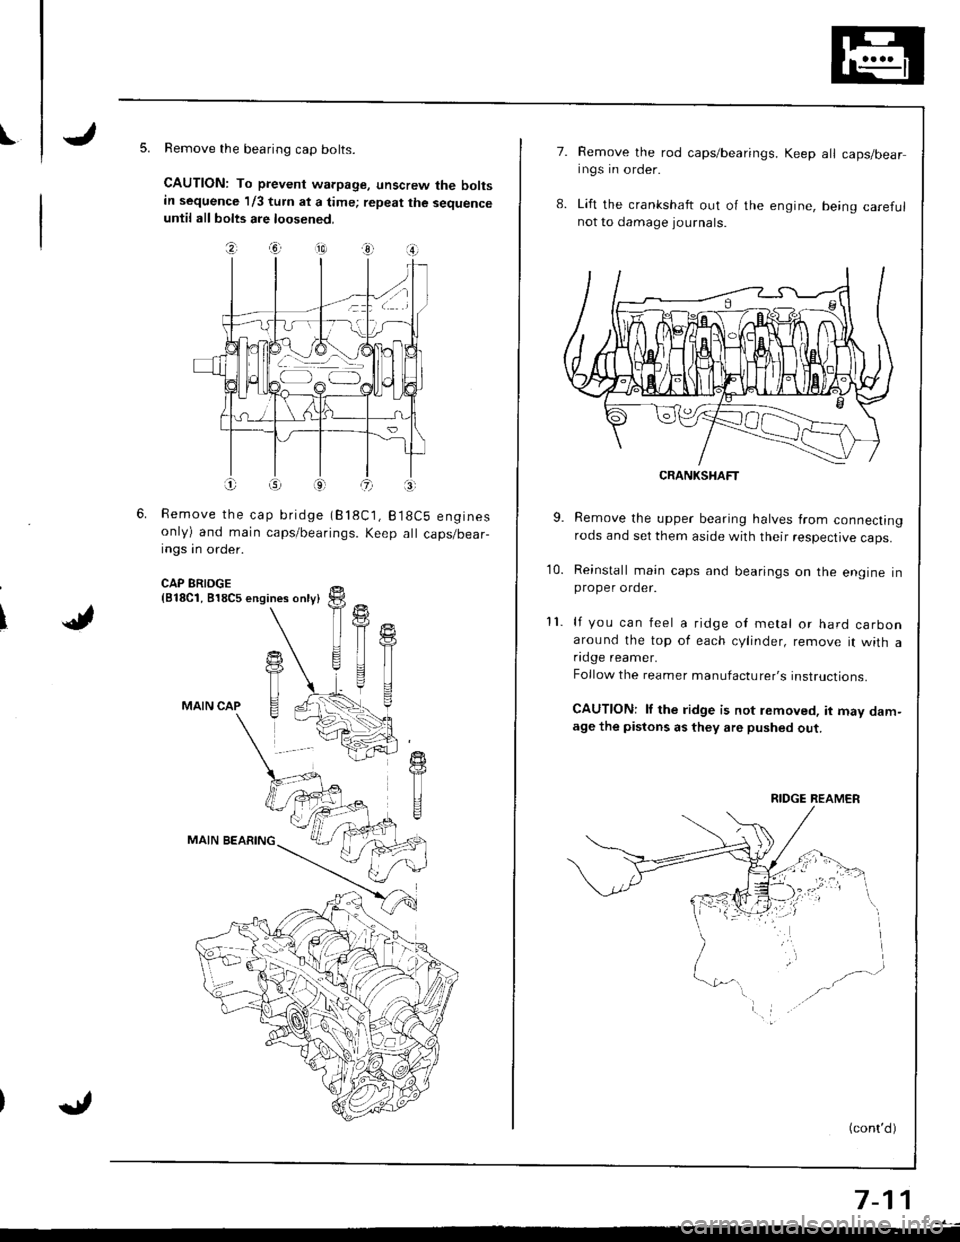 HONDA INTEGRA 1998 4.G Workshop Manual IRemove the bearing cap bolts.
CAUTION: To prevent warpage, unscrew the boltsin sequence 1/3 turn at a time; repeat the sequenceuntil all bolts are loosened.
\J
?, .ia --10) 3r O
Remove the cap bridge